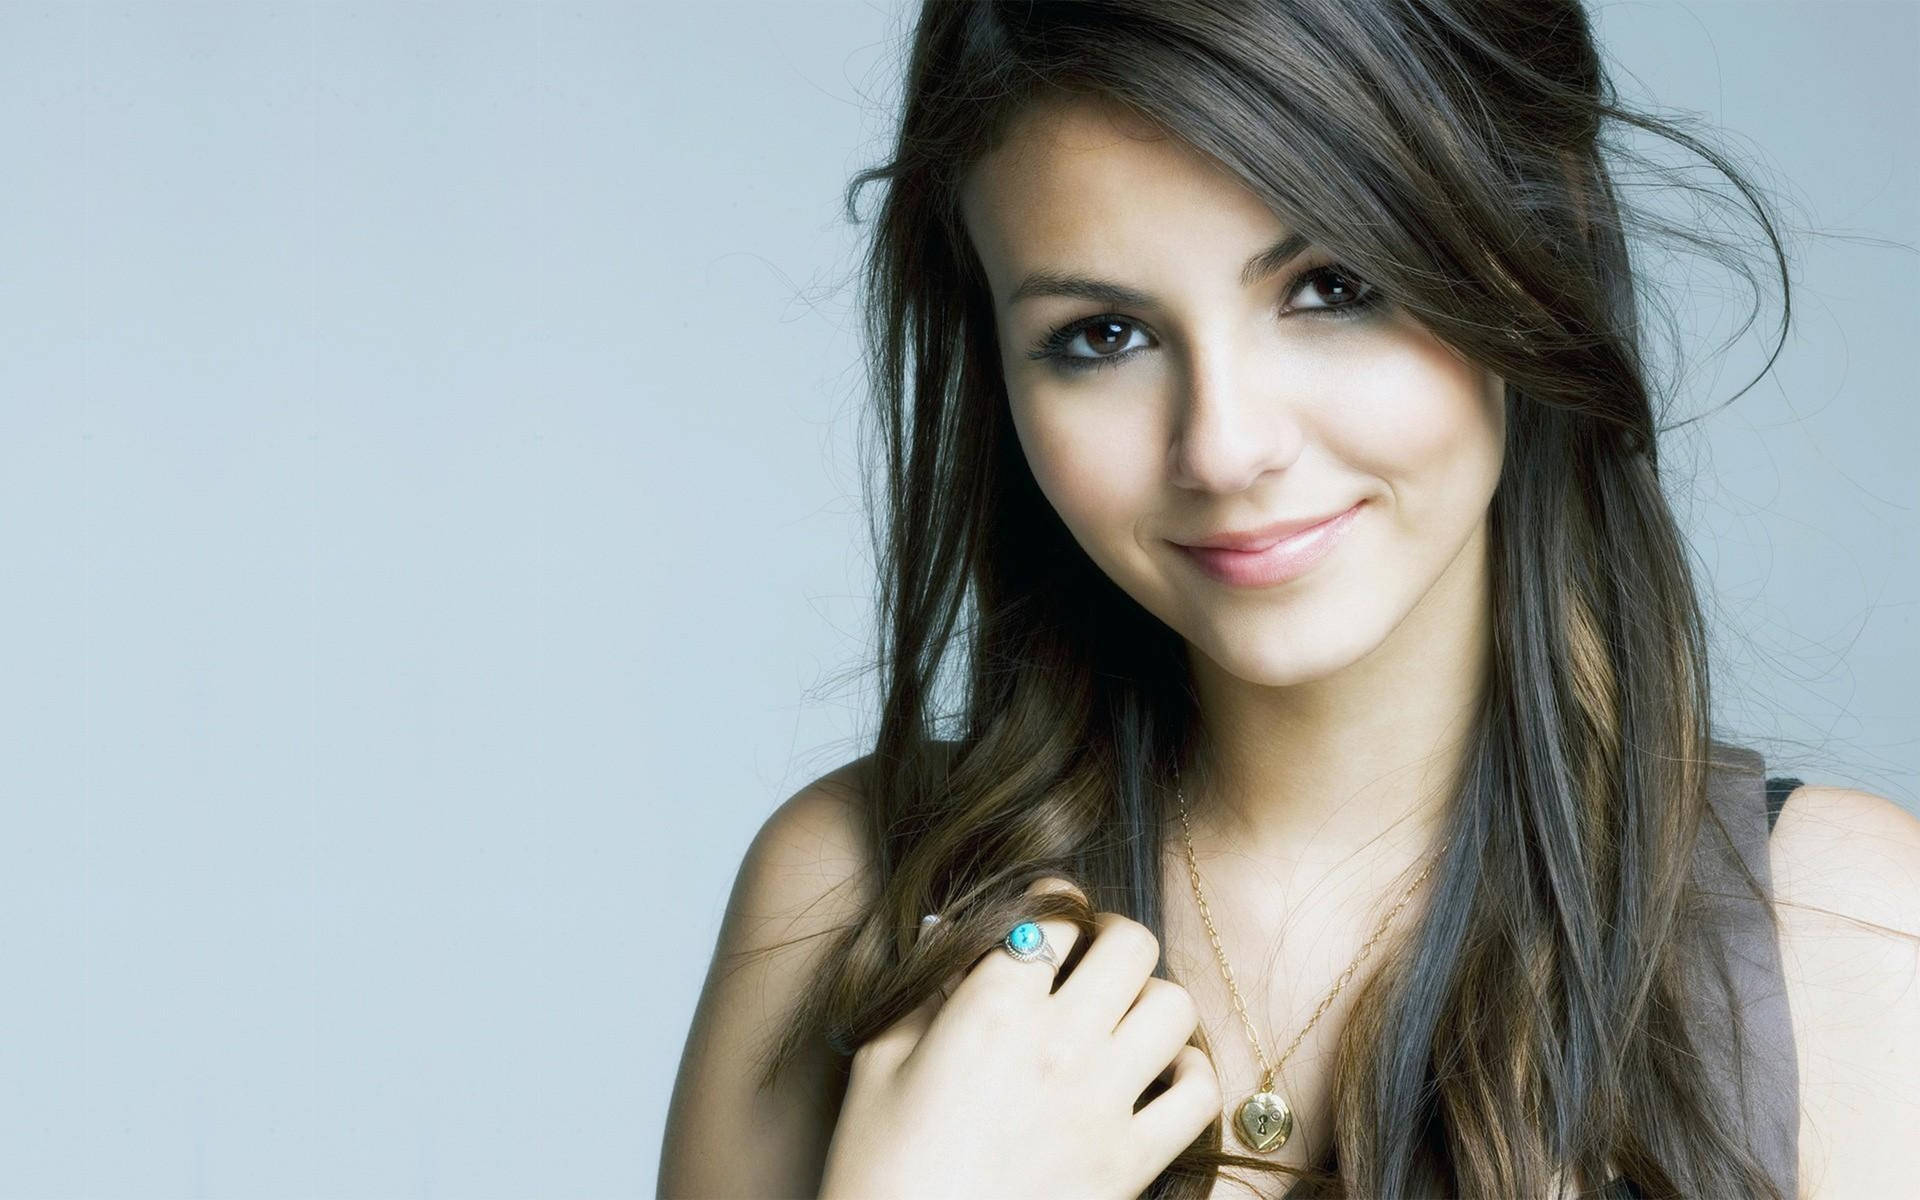 250 Victoria Justice HD Wallpapers and Backgrounds